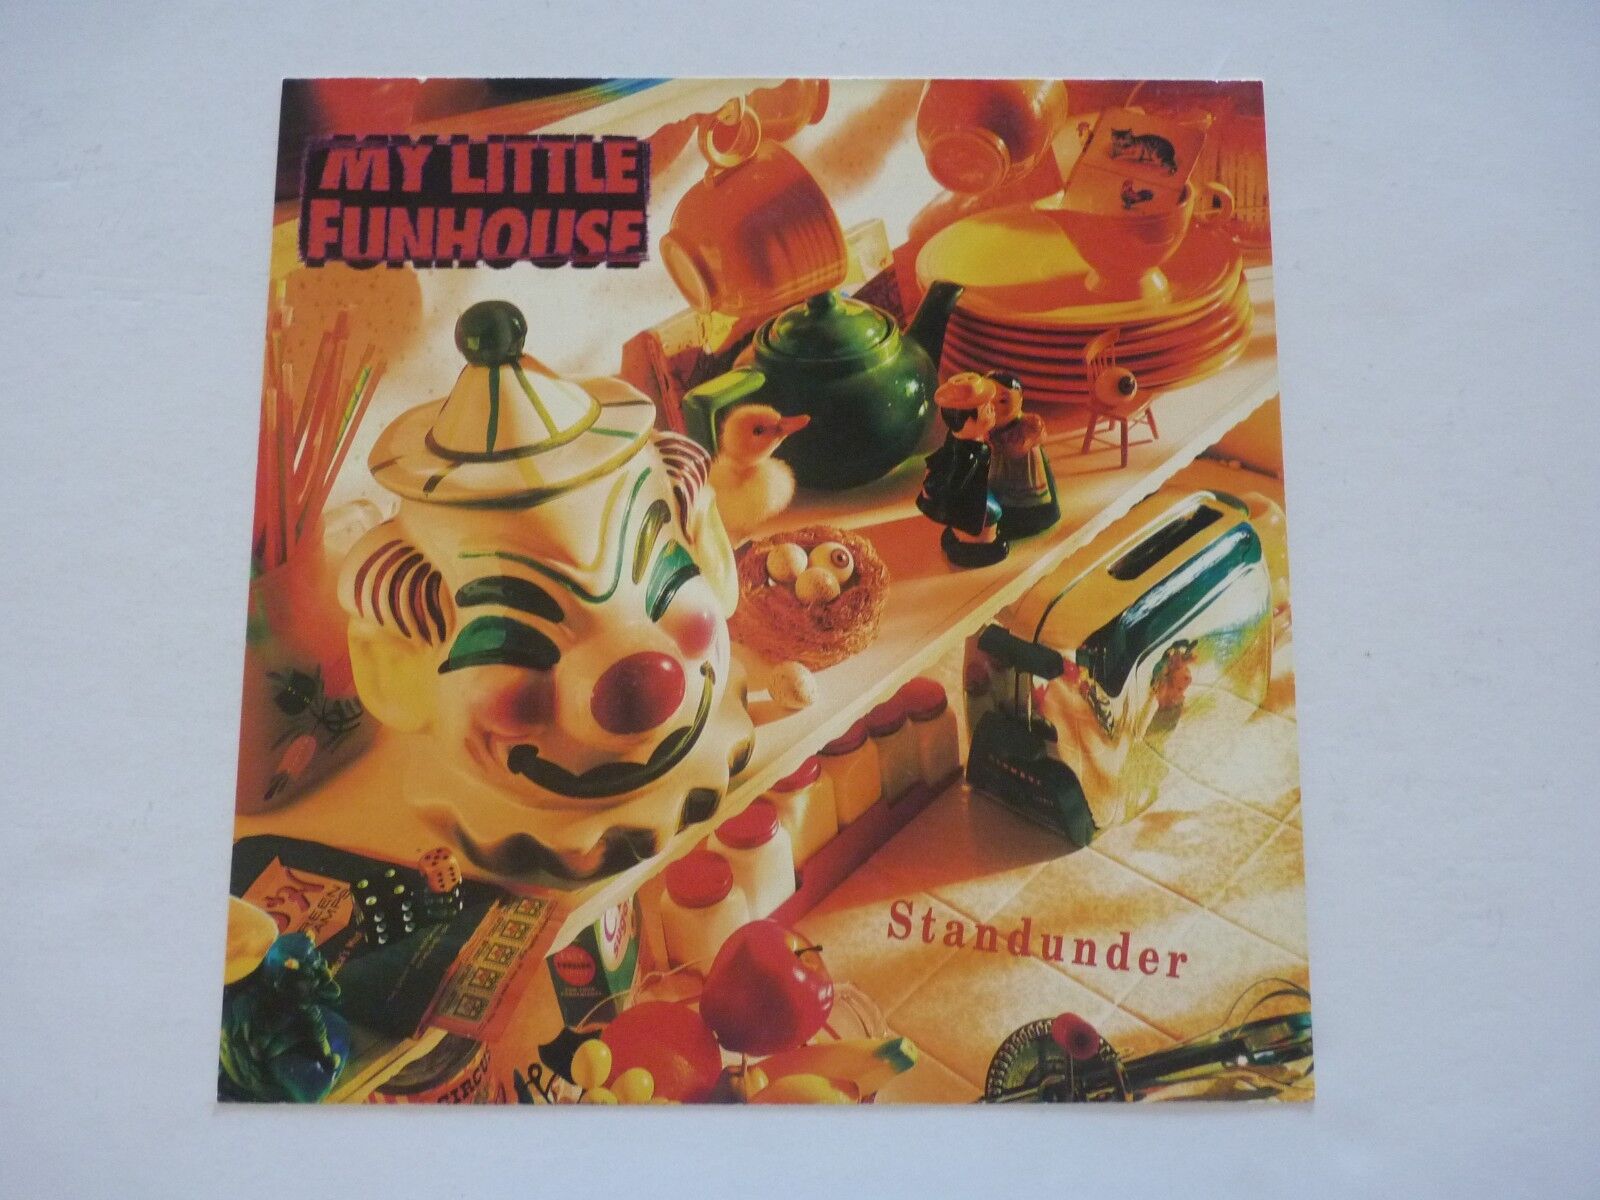 My Little Funhouse Standunder 1993 Promo LP Record Photo Poster painting Flat 12x12 Poster